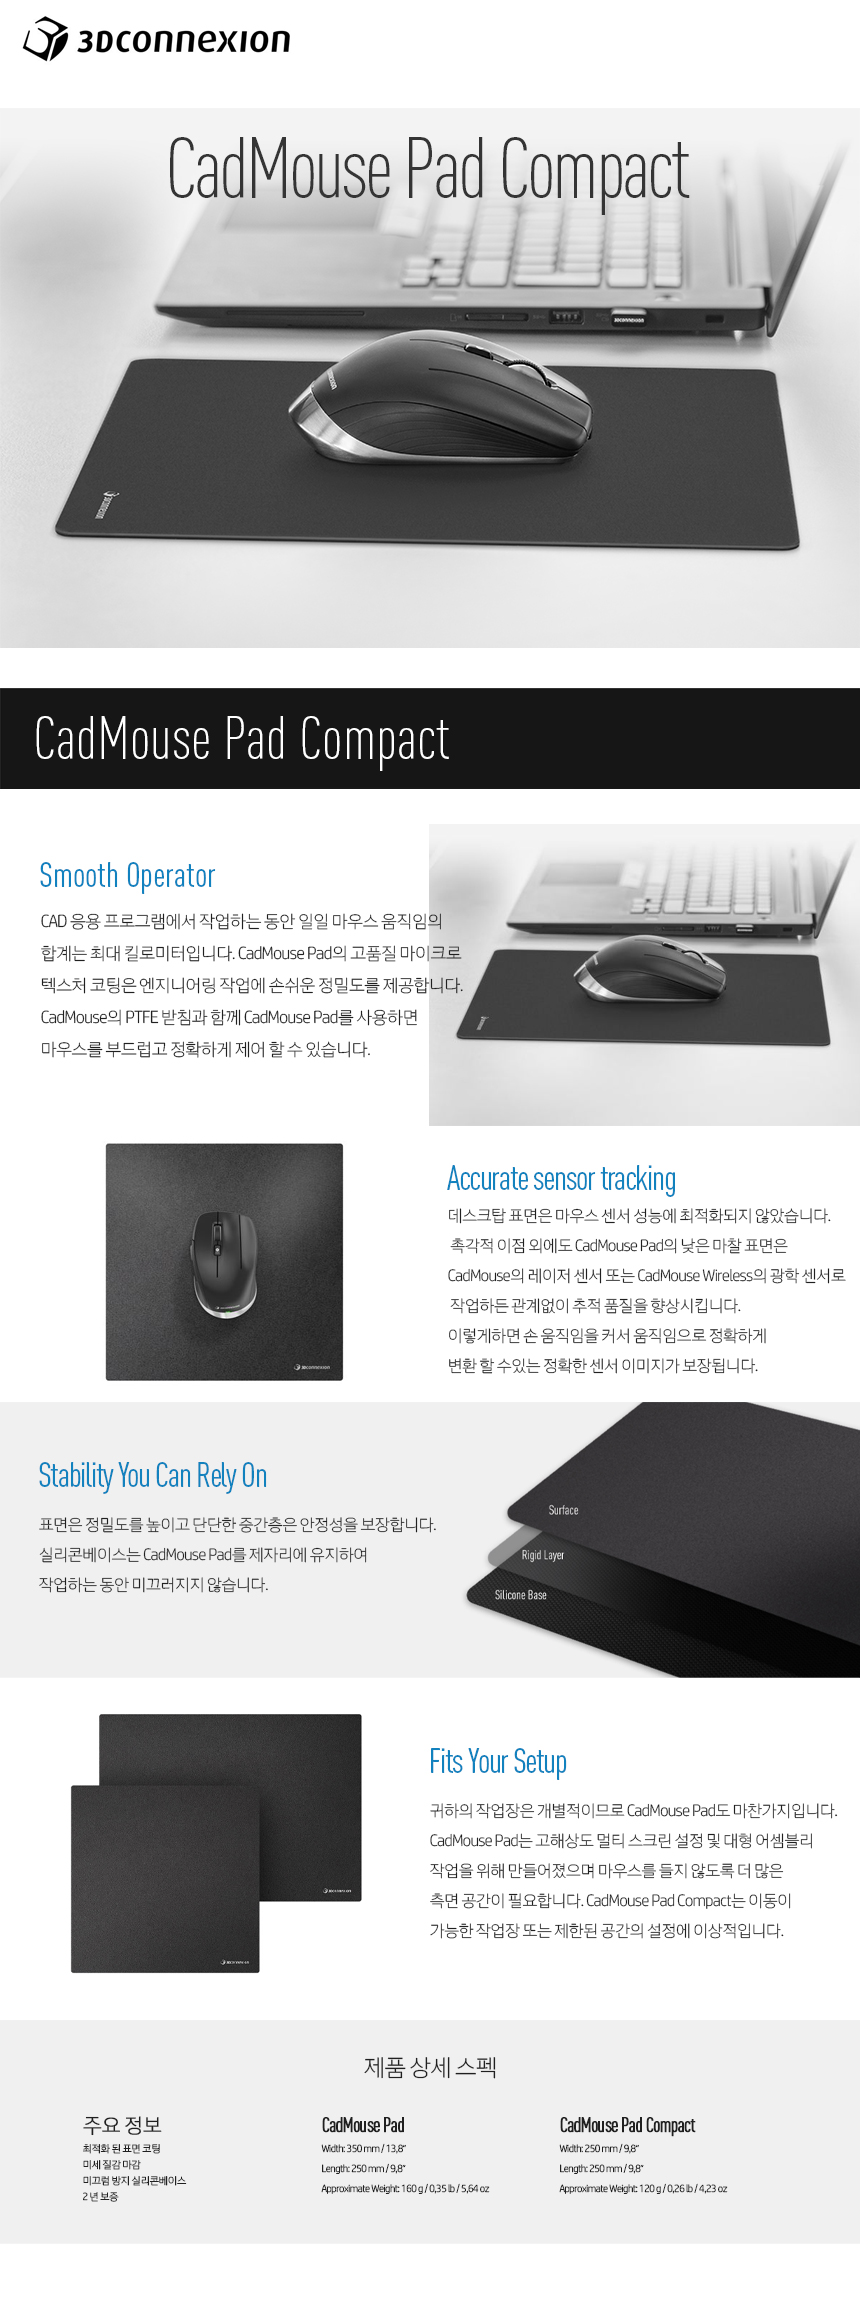 CadMouse-PAD-Compact_130441.jpg